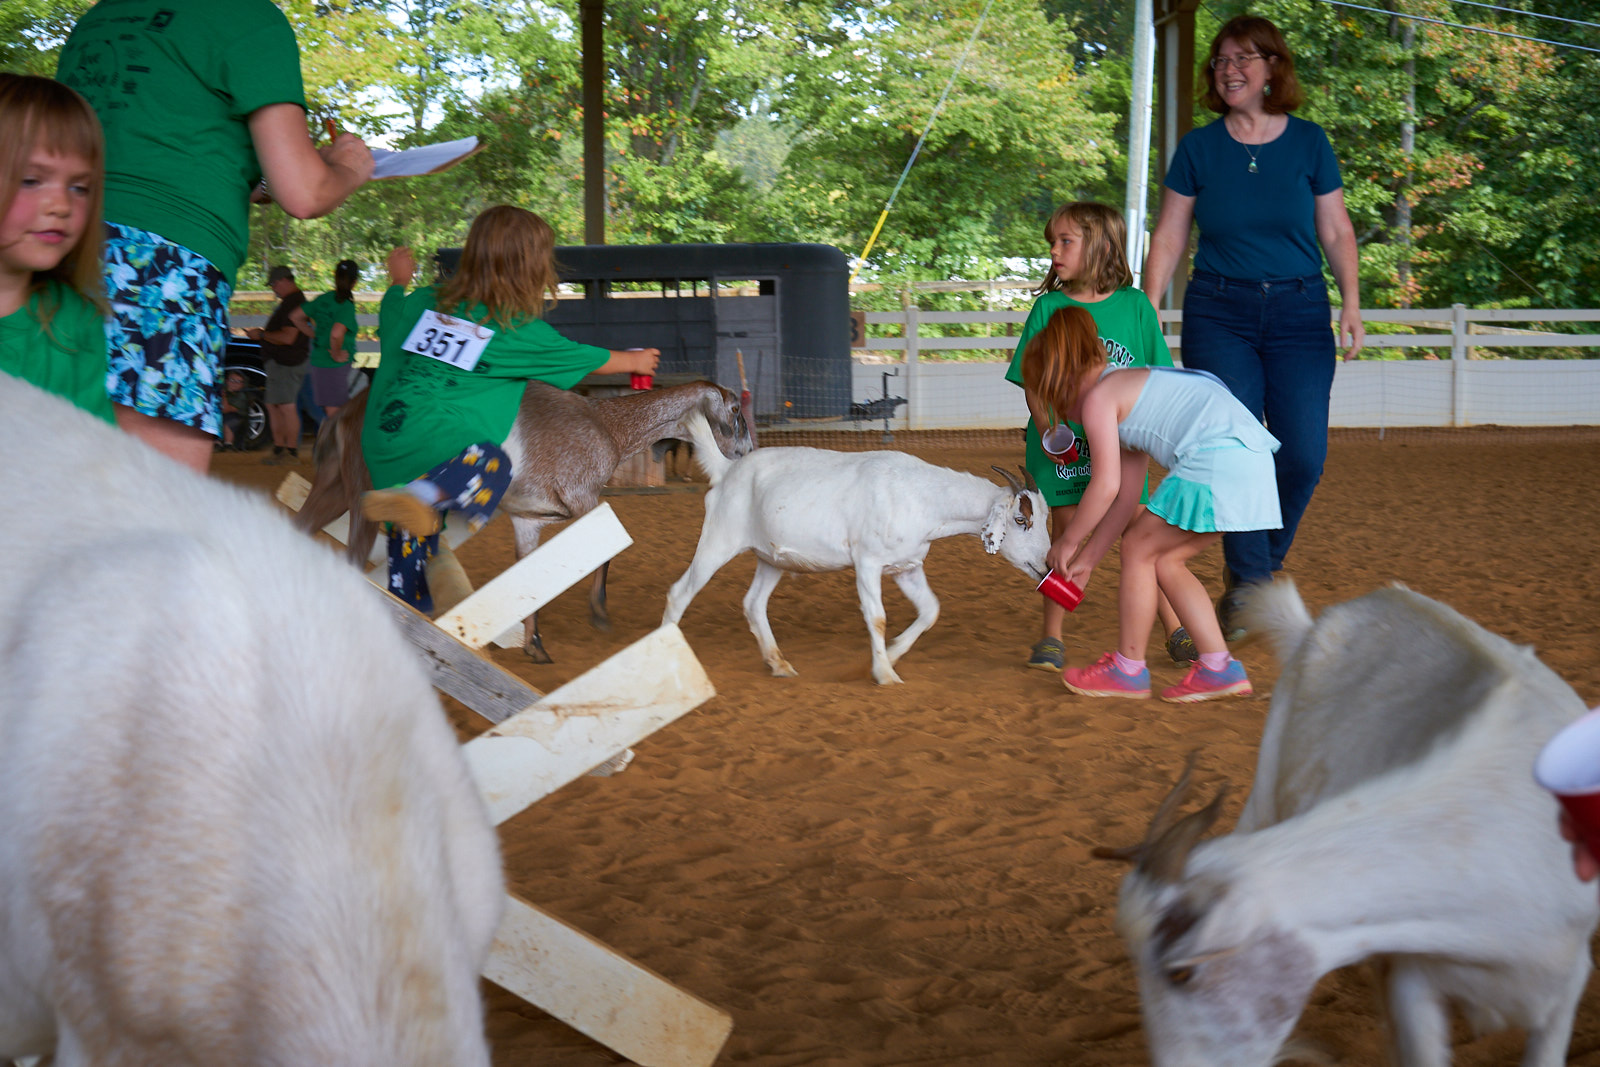 Run with the goats event photography Knoxville and SHANGRI-LA THERAPEUTIC ACADEMY OF RIDING and S